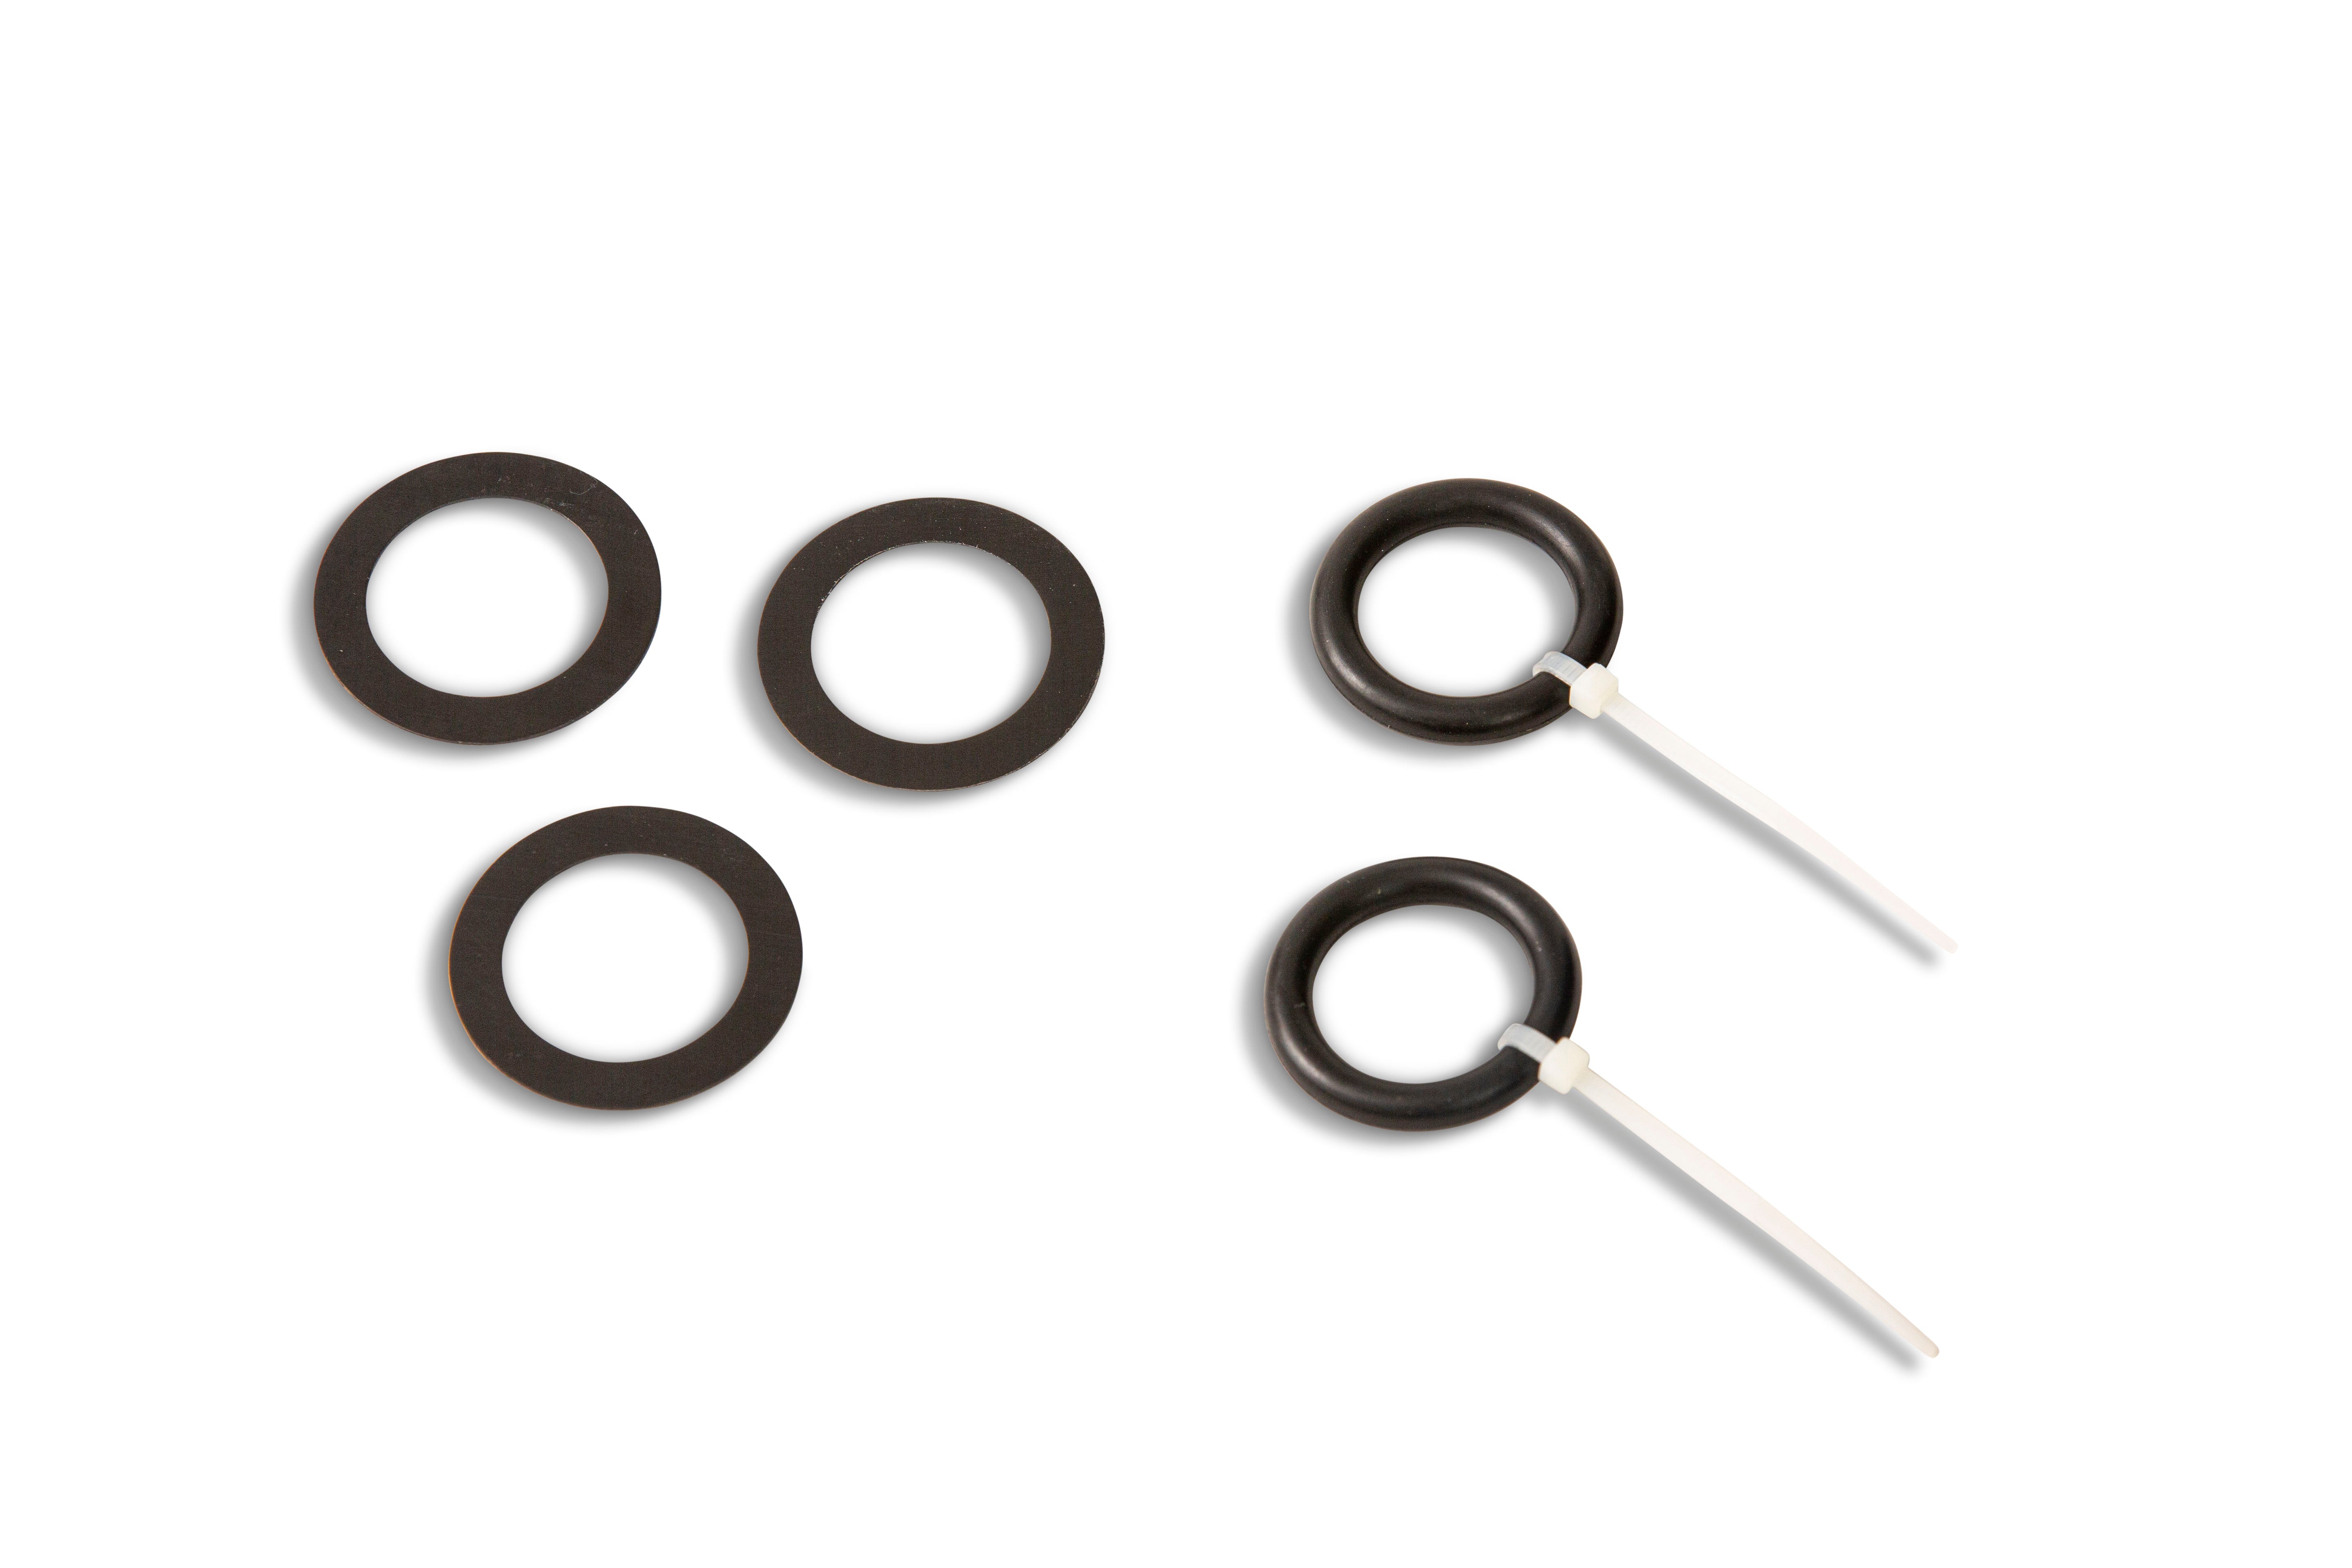 Giffin Grip O-Rings and Shims